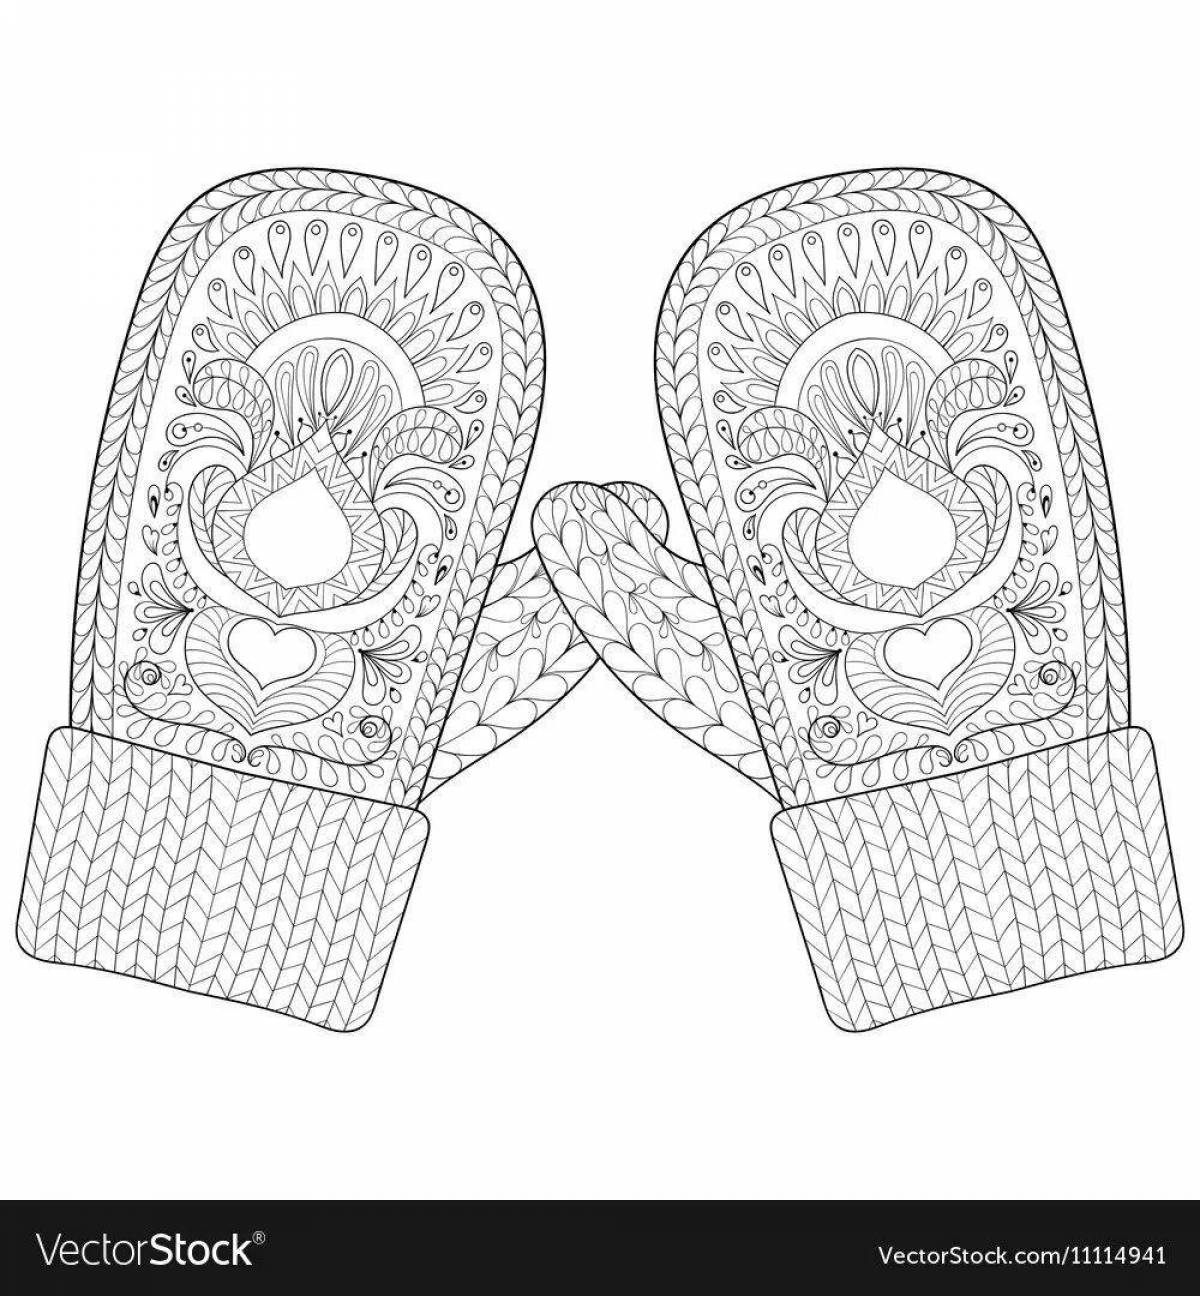 Coloring page cute rubber mittens